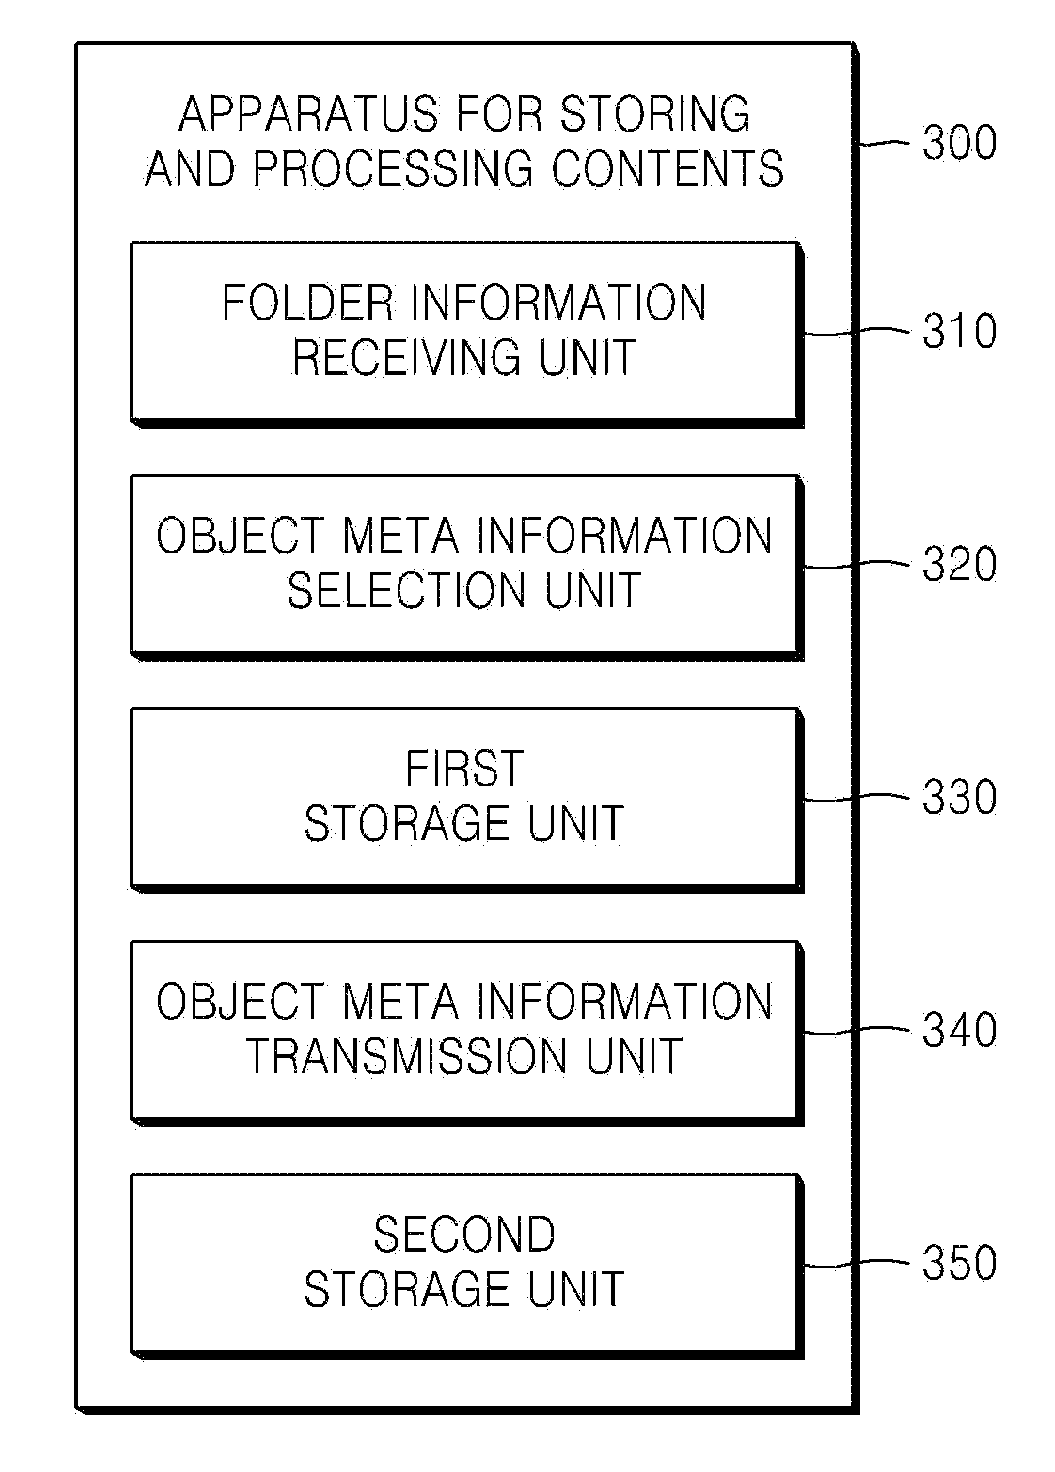 Apparatus for storing and processing contents and method of transmitting object meta information on contents using media transfer protocol from the apparatus